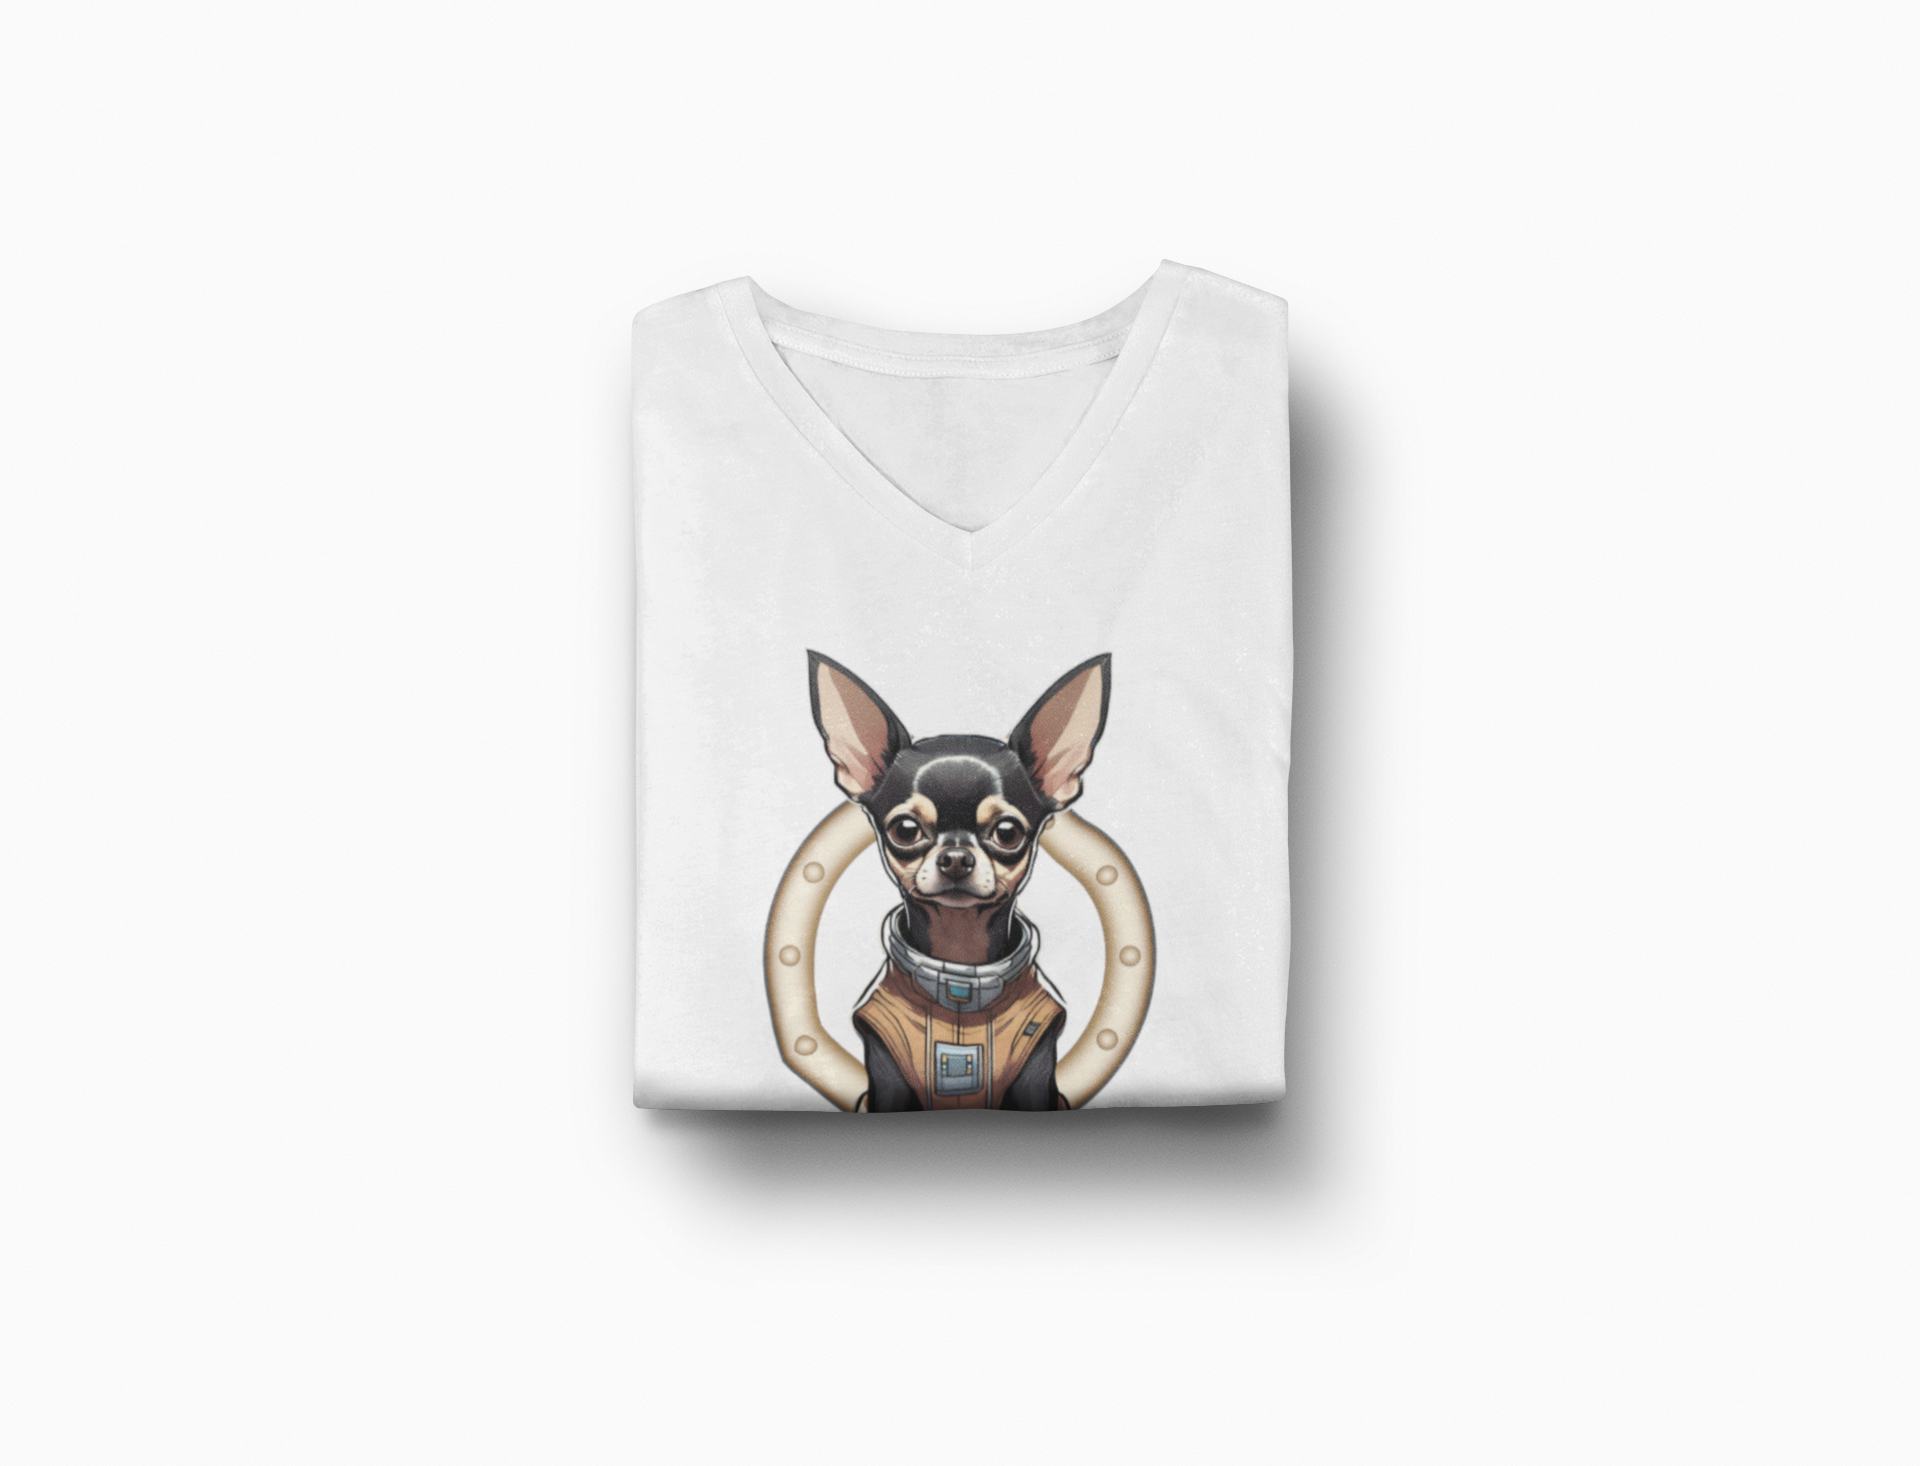 Unisex Jersey Short Sleeve V-Neck Tee with Cute Chihuahua Astronaut Design - Mockup Folded